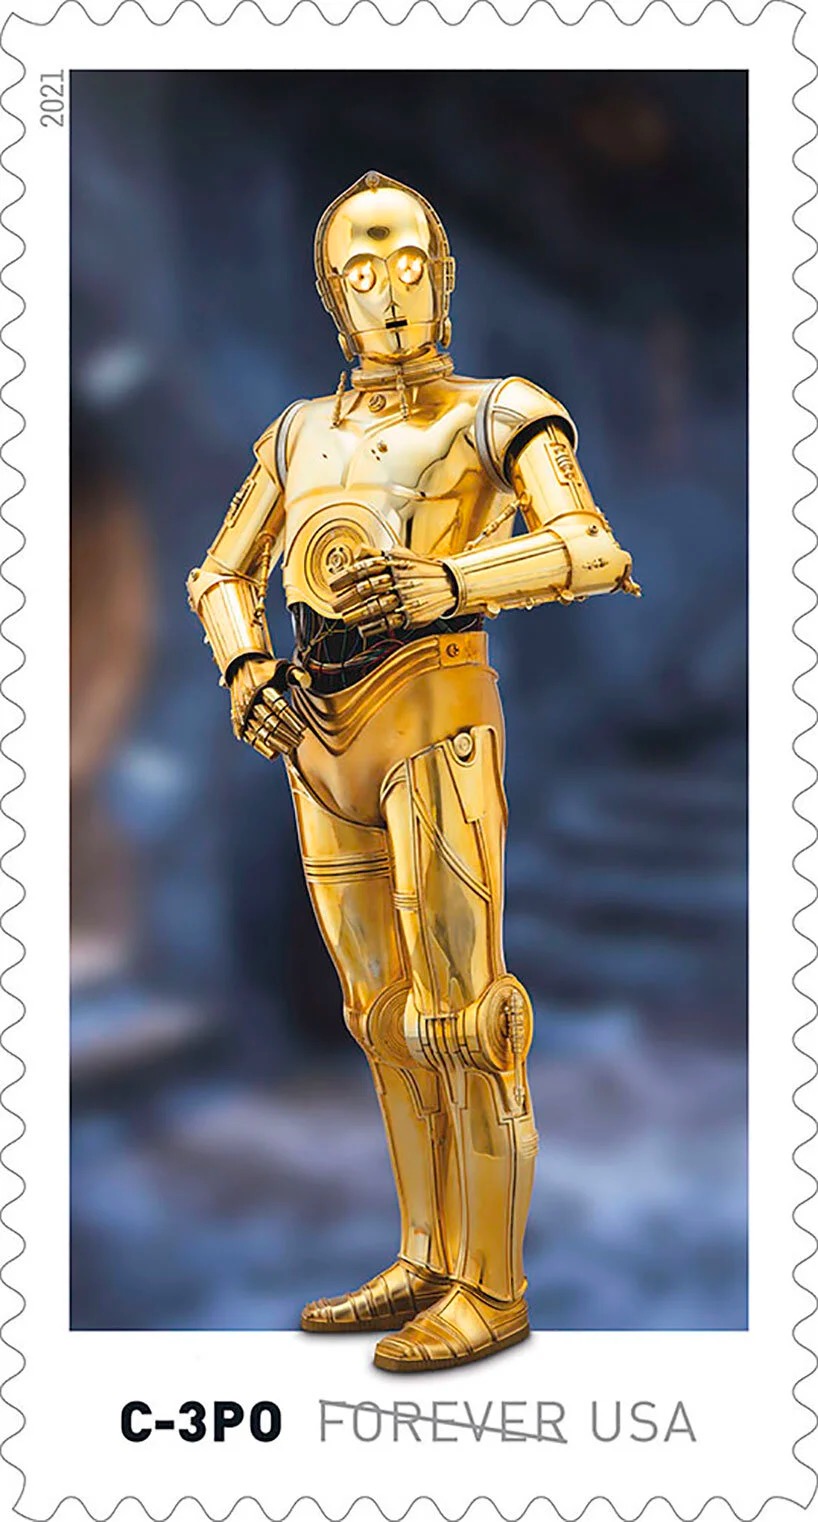 Star Wars droids stamps from the USPS